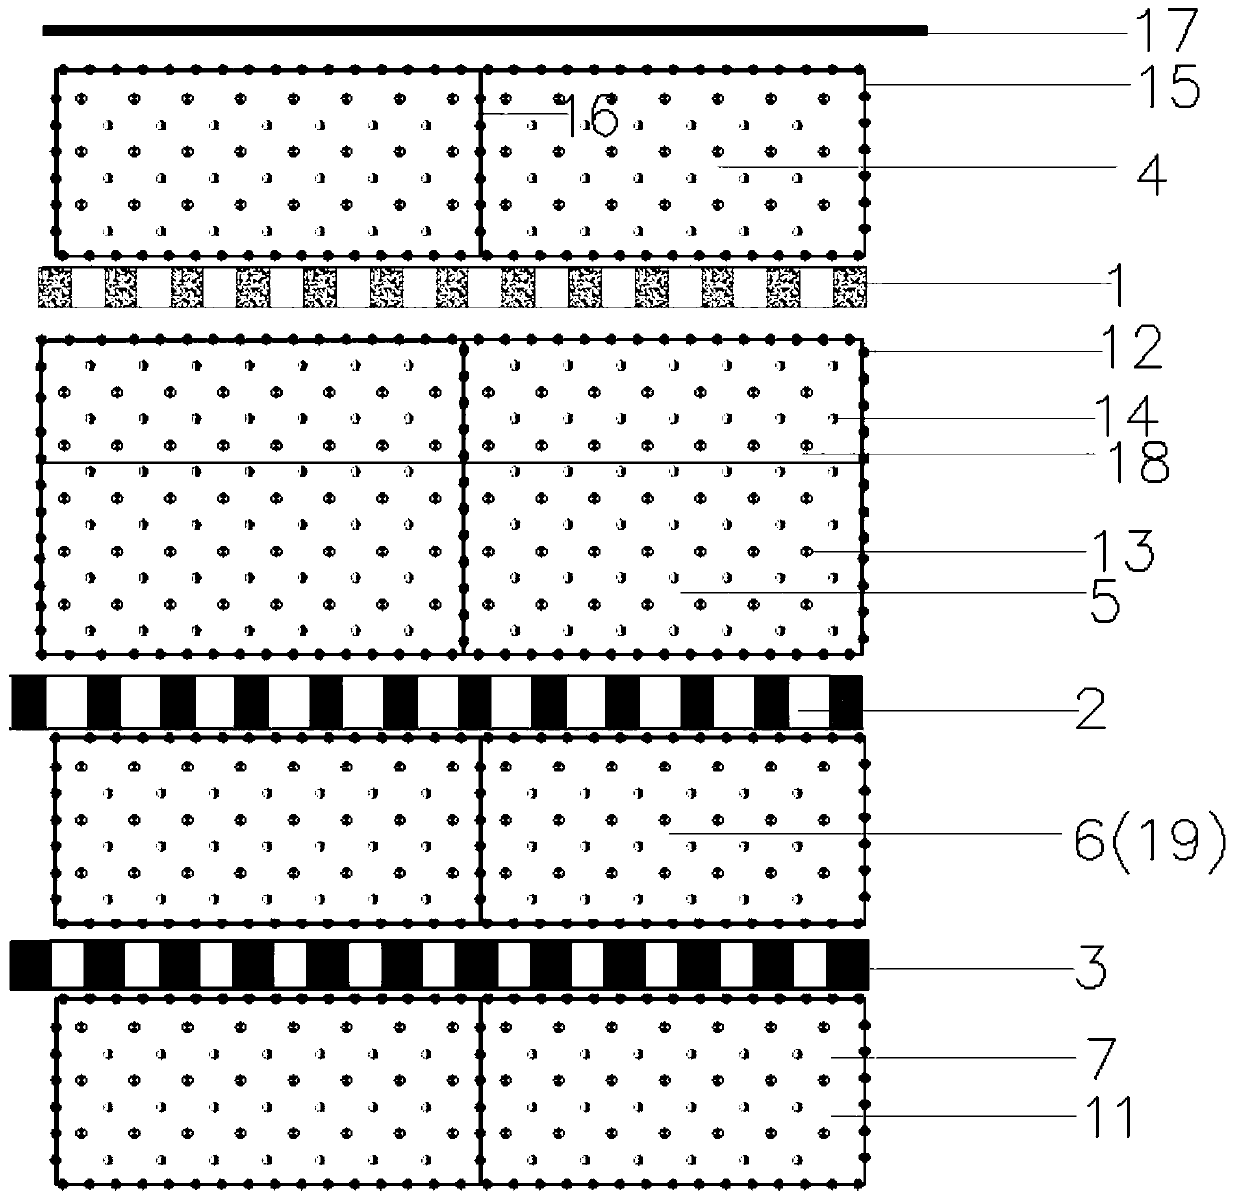 Multi-pile stepped retaining structure combined with manual filling soil grouting-reinforcement technology and construction method of multi-pile stepped retaining structure